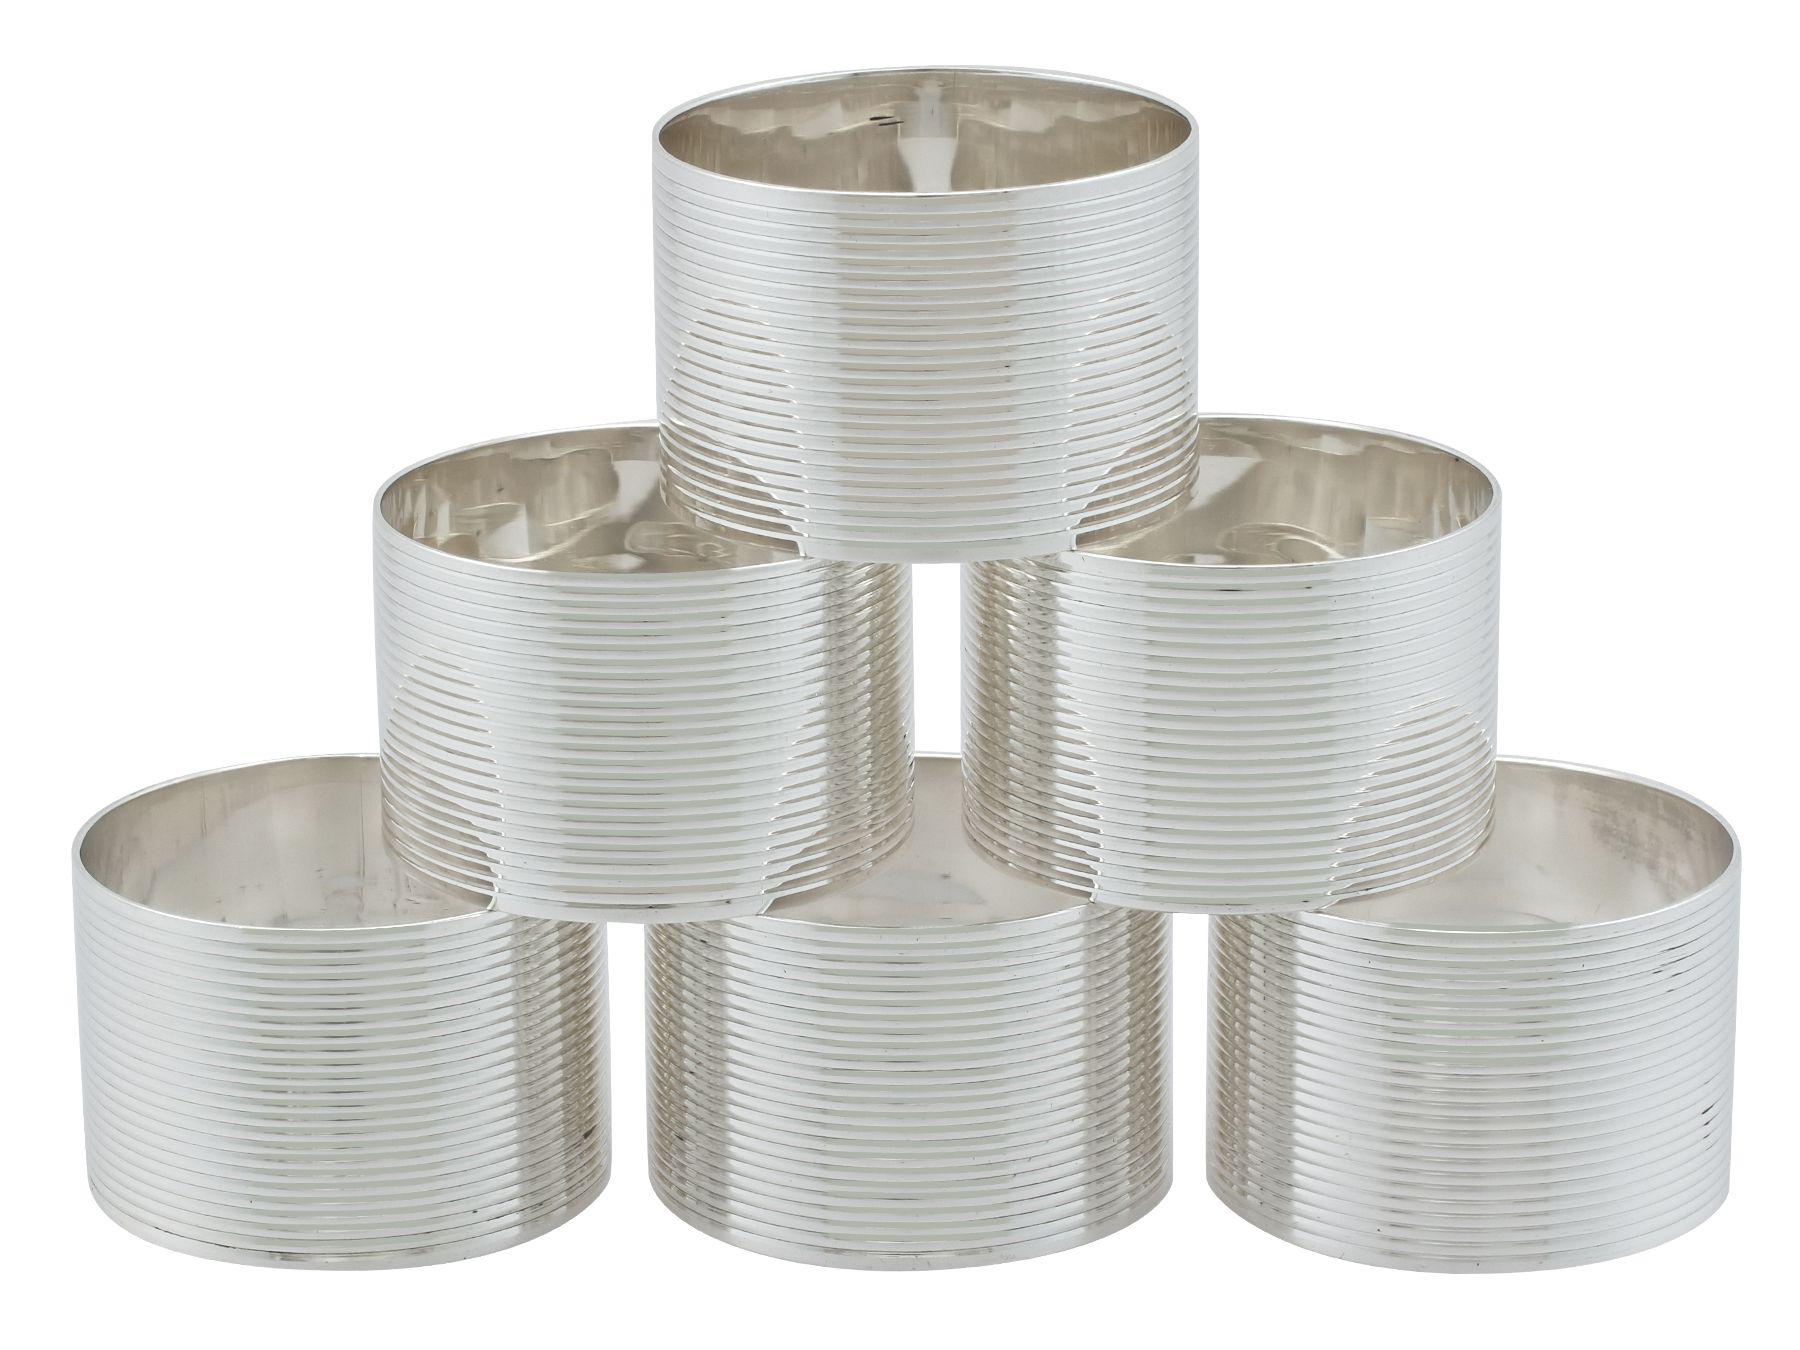 An exceptional, fine and impressive set of six vintage George VI English sterling silver napkin rings; an addition to our London silverware collection

This exceptional set of vintage silver napkin rings, in sterling standard, consists of six